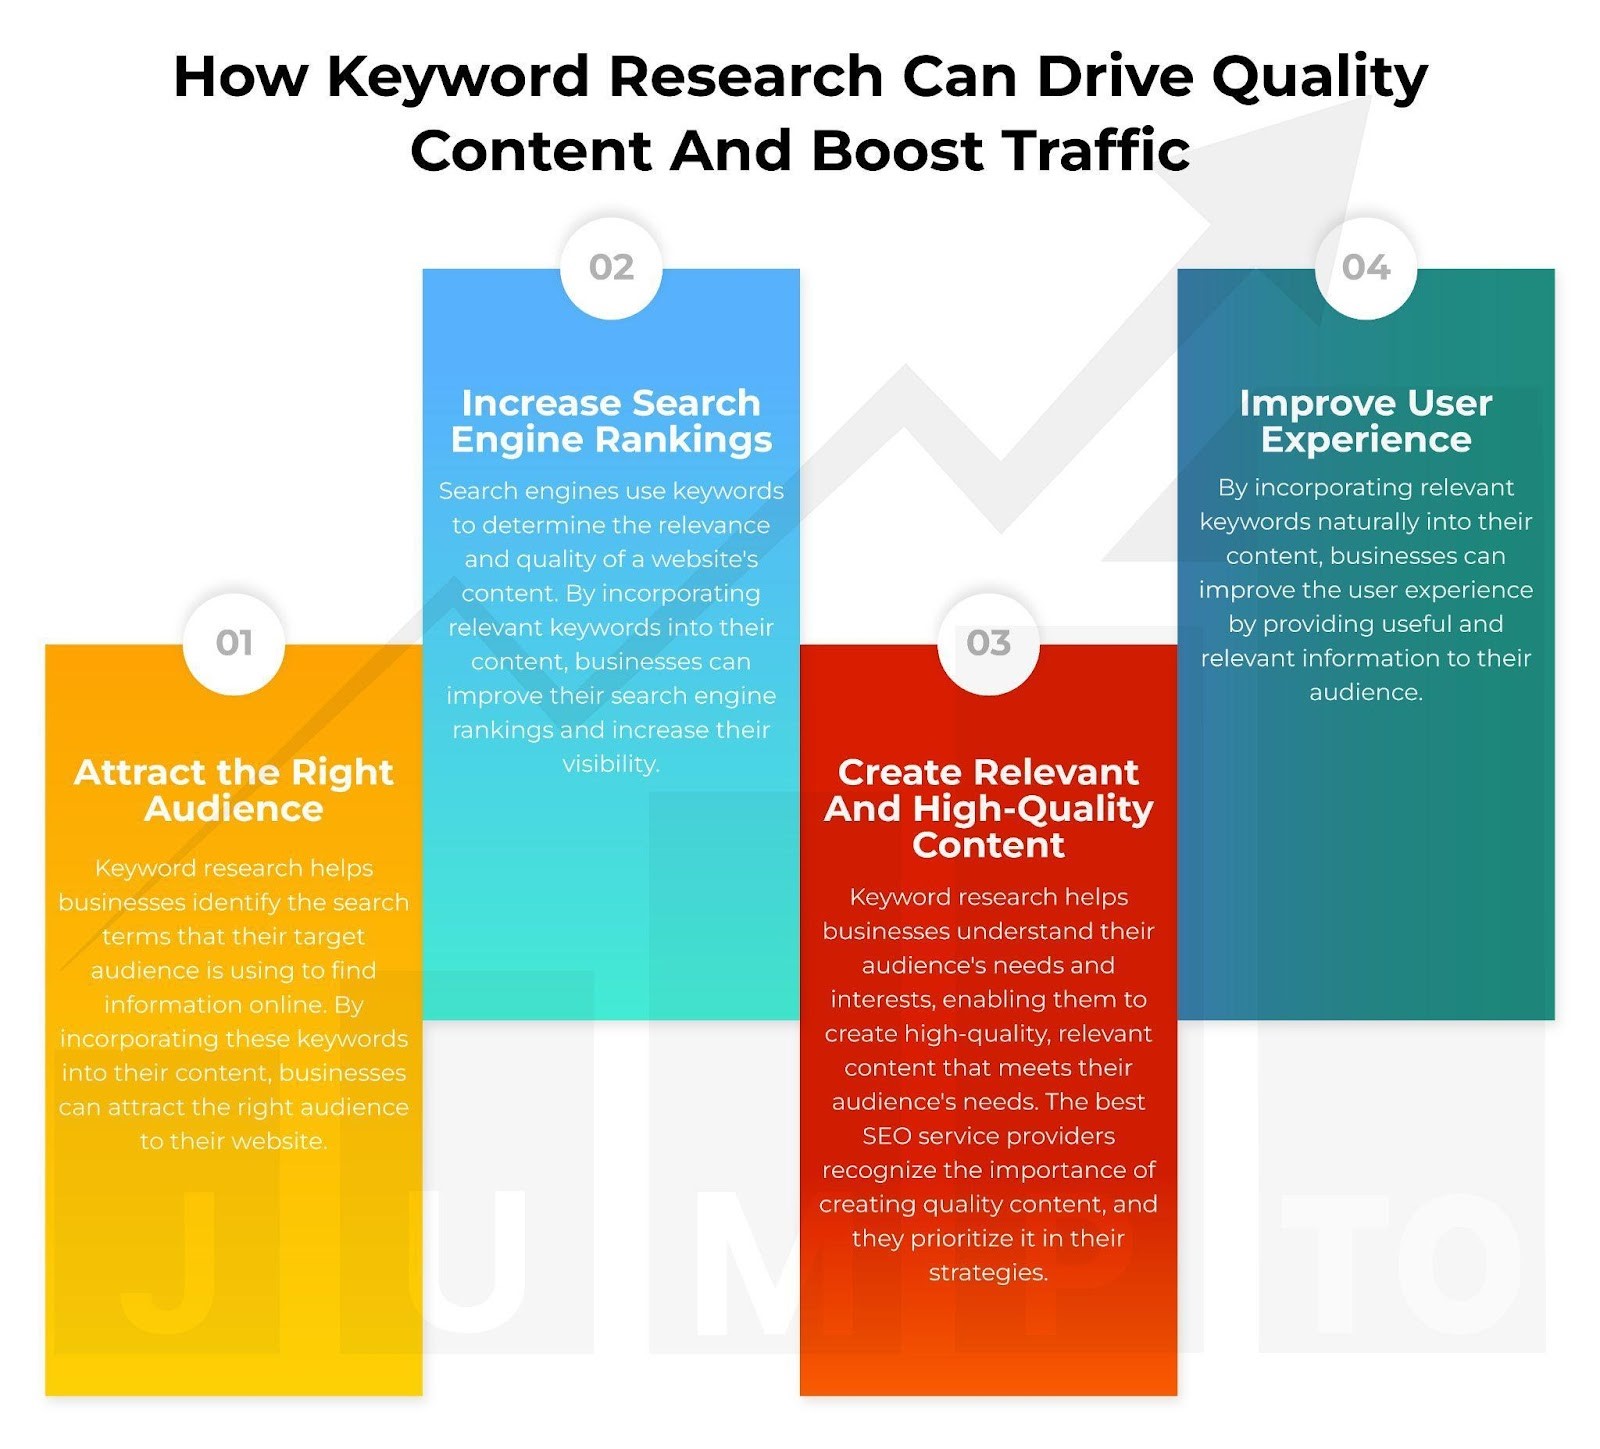 the infographic shows How Keyword Research Can Drive Quality Content And Boost Traffic.
https://jumpto1.com/seo-services/